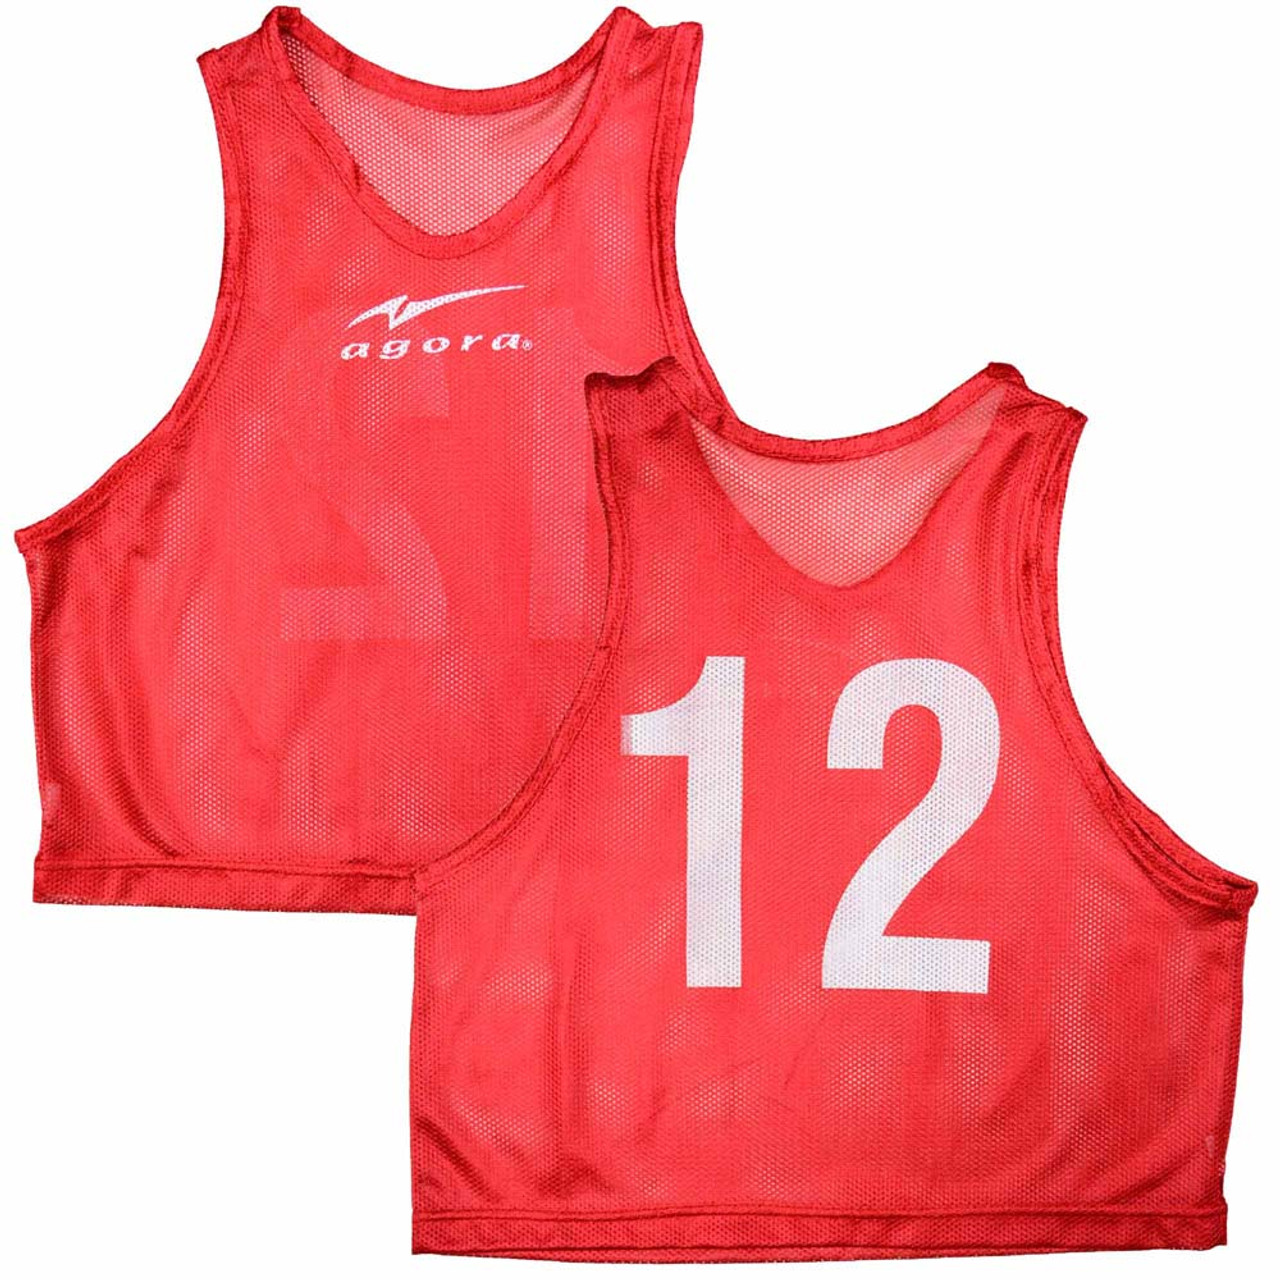 AGORA Numbered Scrimmage Vests - Pack of 12 (1-12)